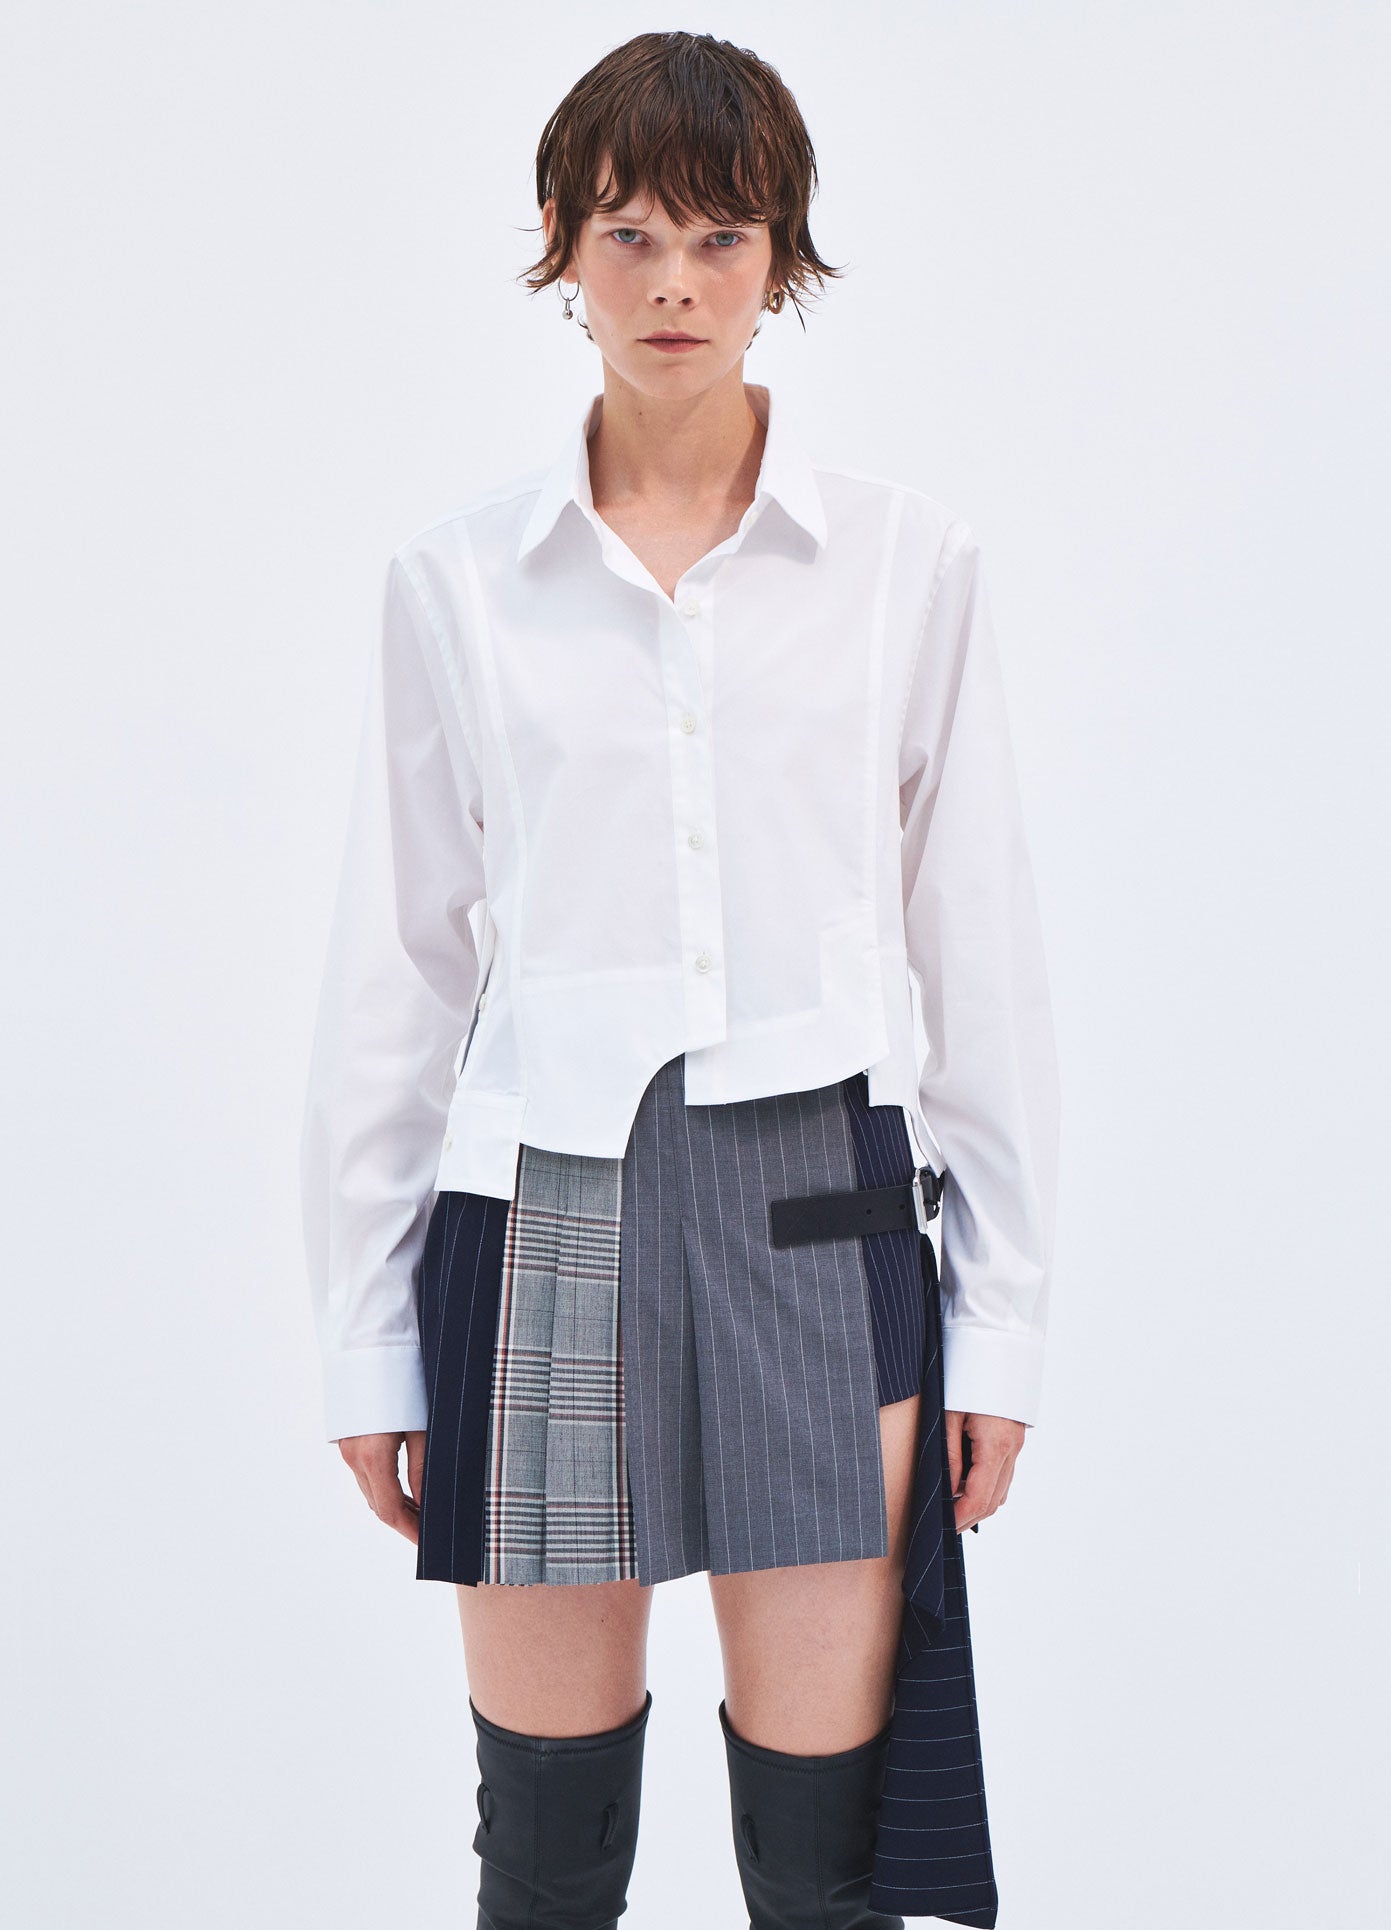 MONSE Spring 2024 Deconstructed Cropped Button Down in Ivory on model front view